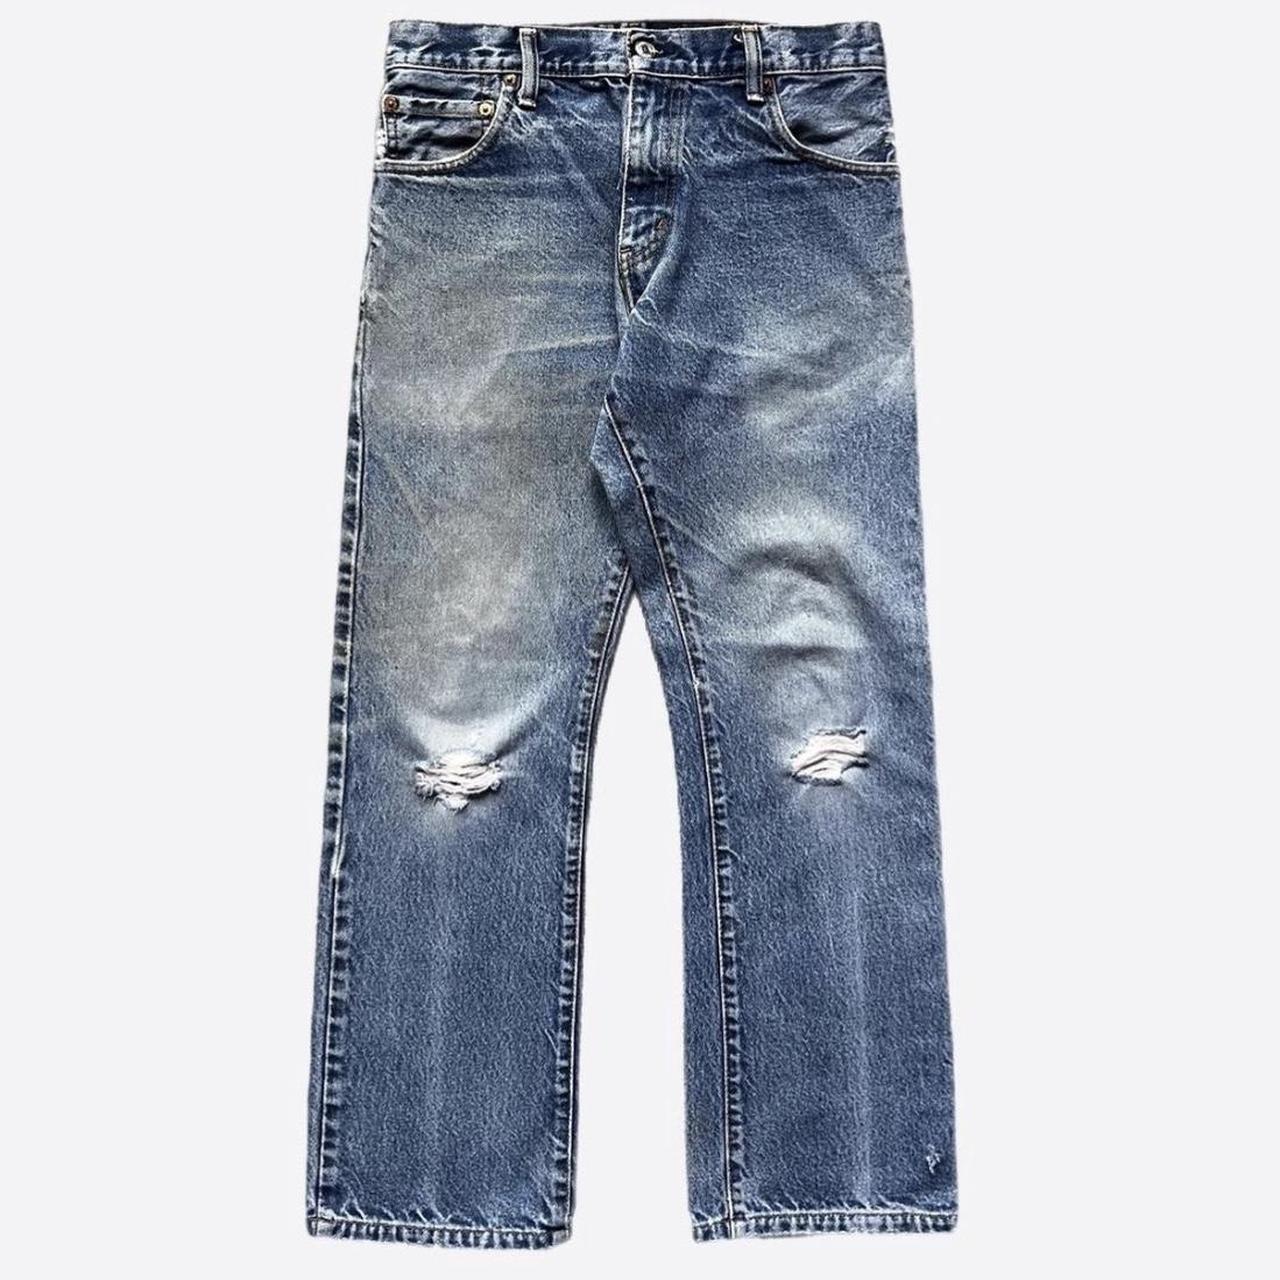 Levi's Men's Blue and Navy Jeans